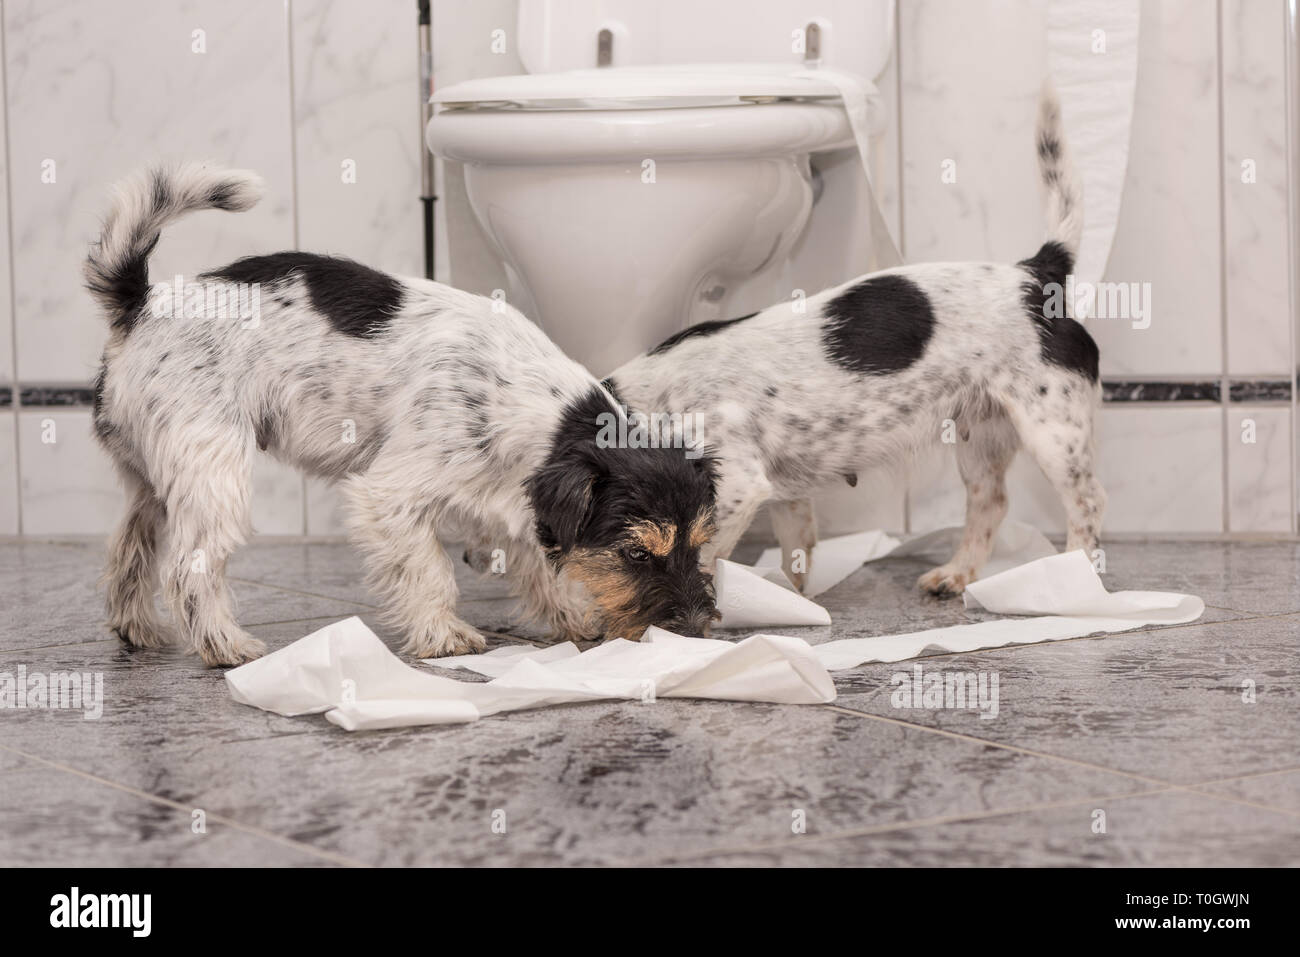 Twos dogs making mess - chaos jack russell terrier in the bathroom Stock Photo